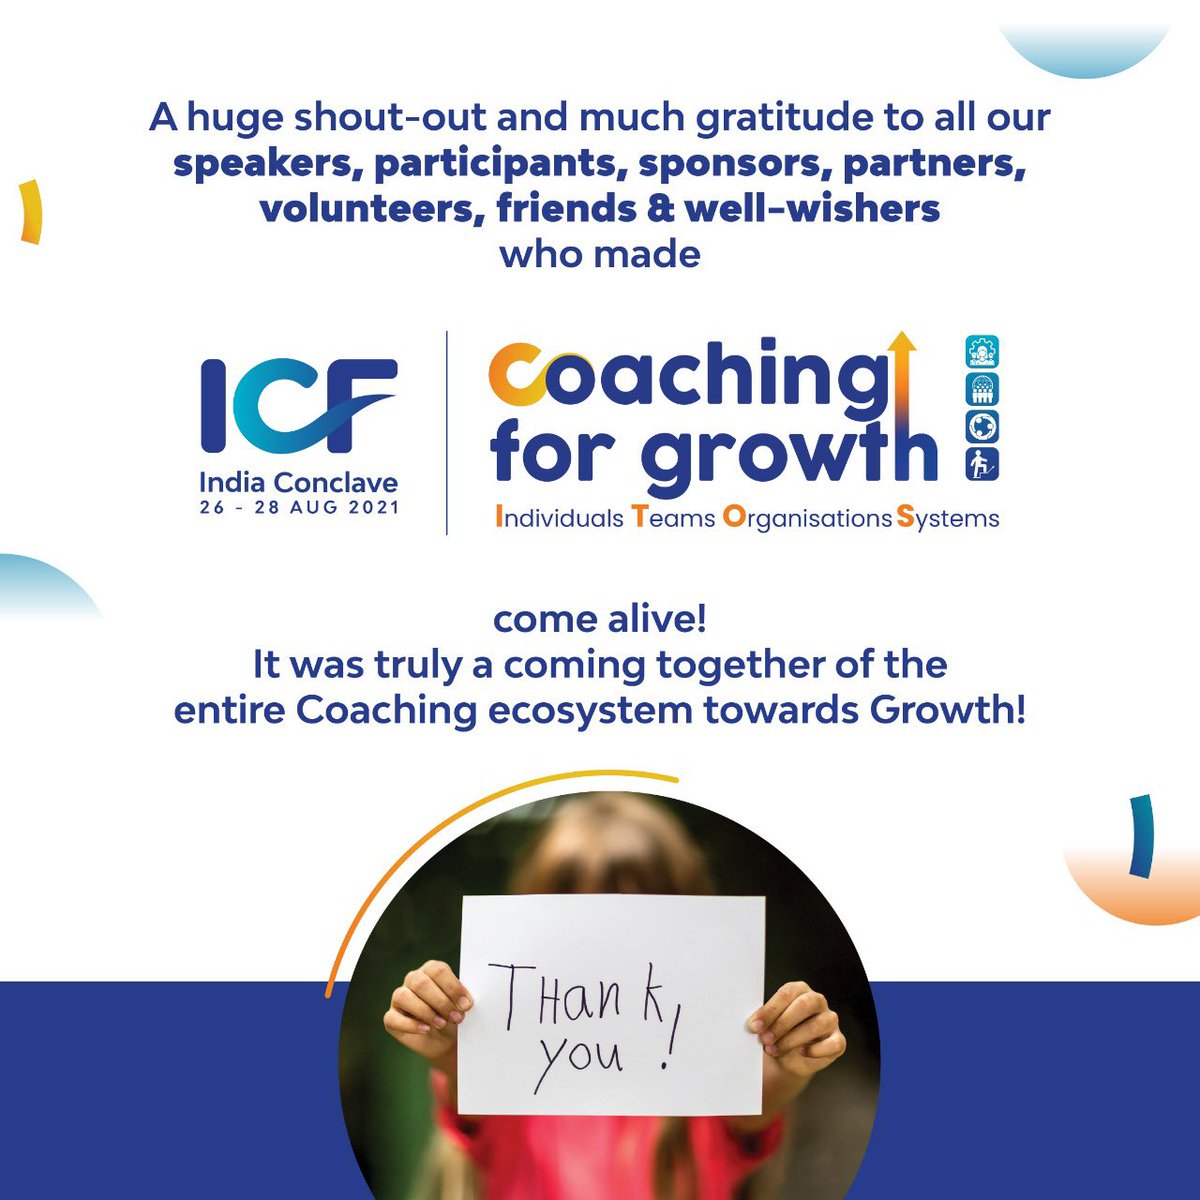 Thanks to all who came and participated whole-heartedly to make the ICF India Conclave 2021 the magnificent experience that it was!

We truly appreciate your valuable support and participation! #coaching #coachingforgrowth #internationalcoachingfederation